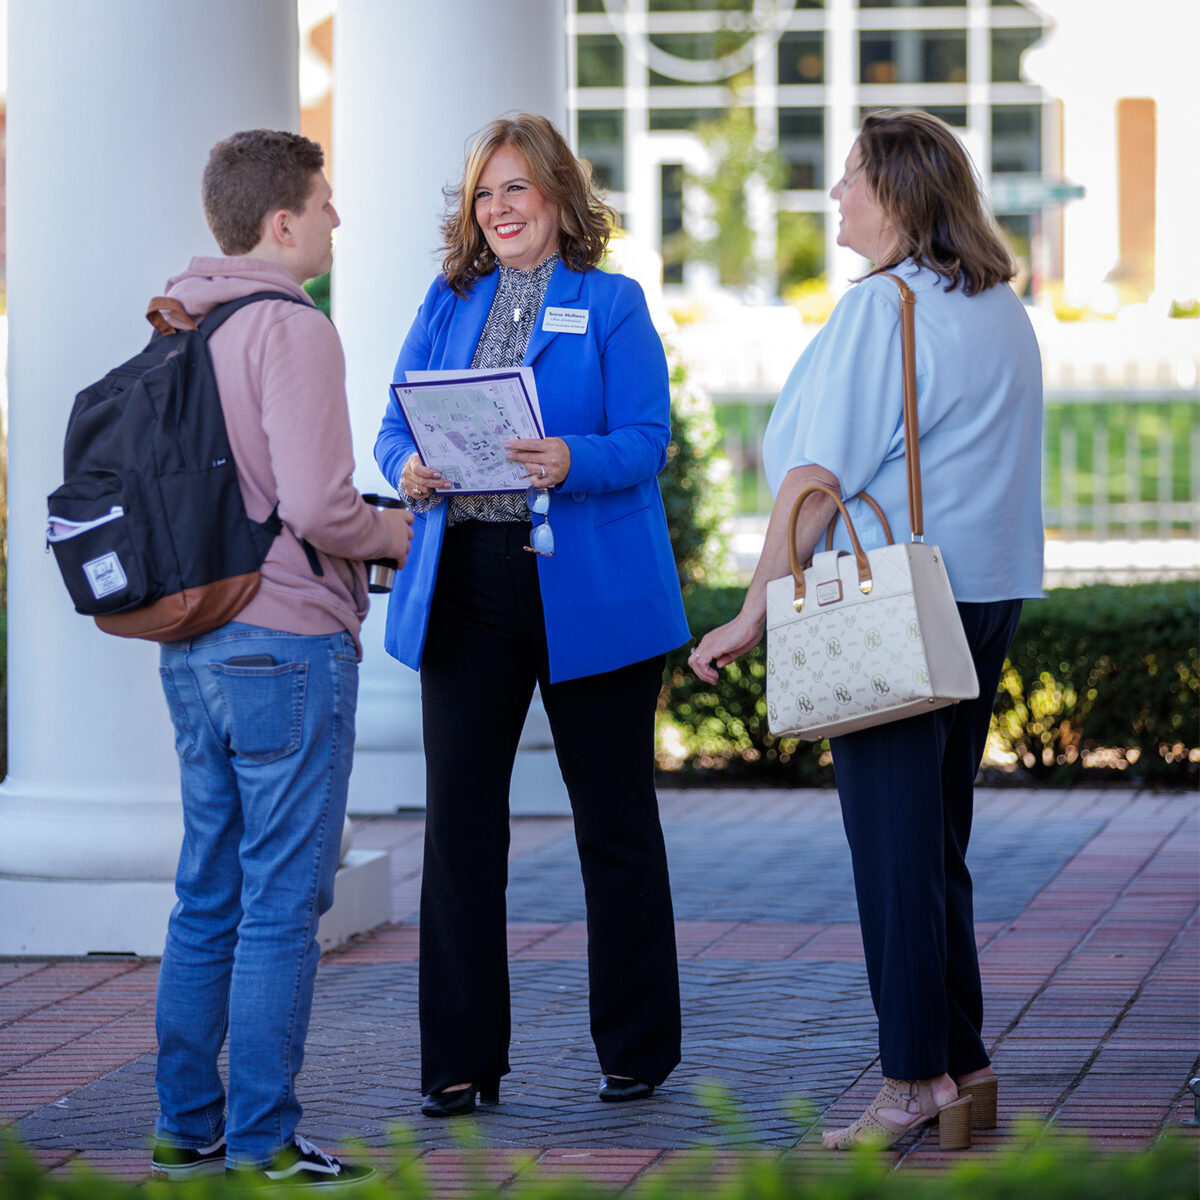 Admissions counselors with student